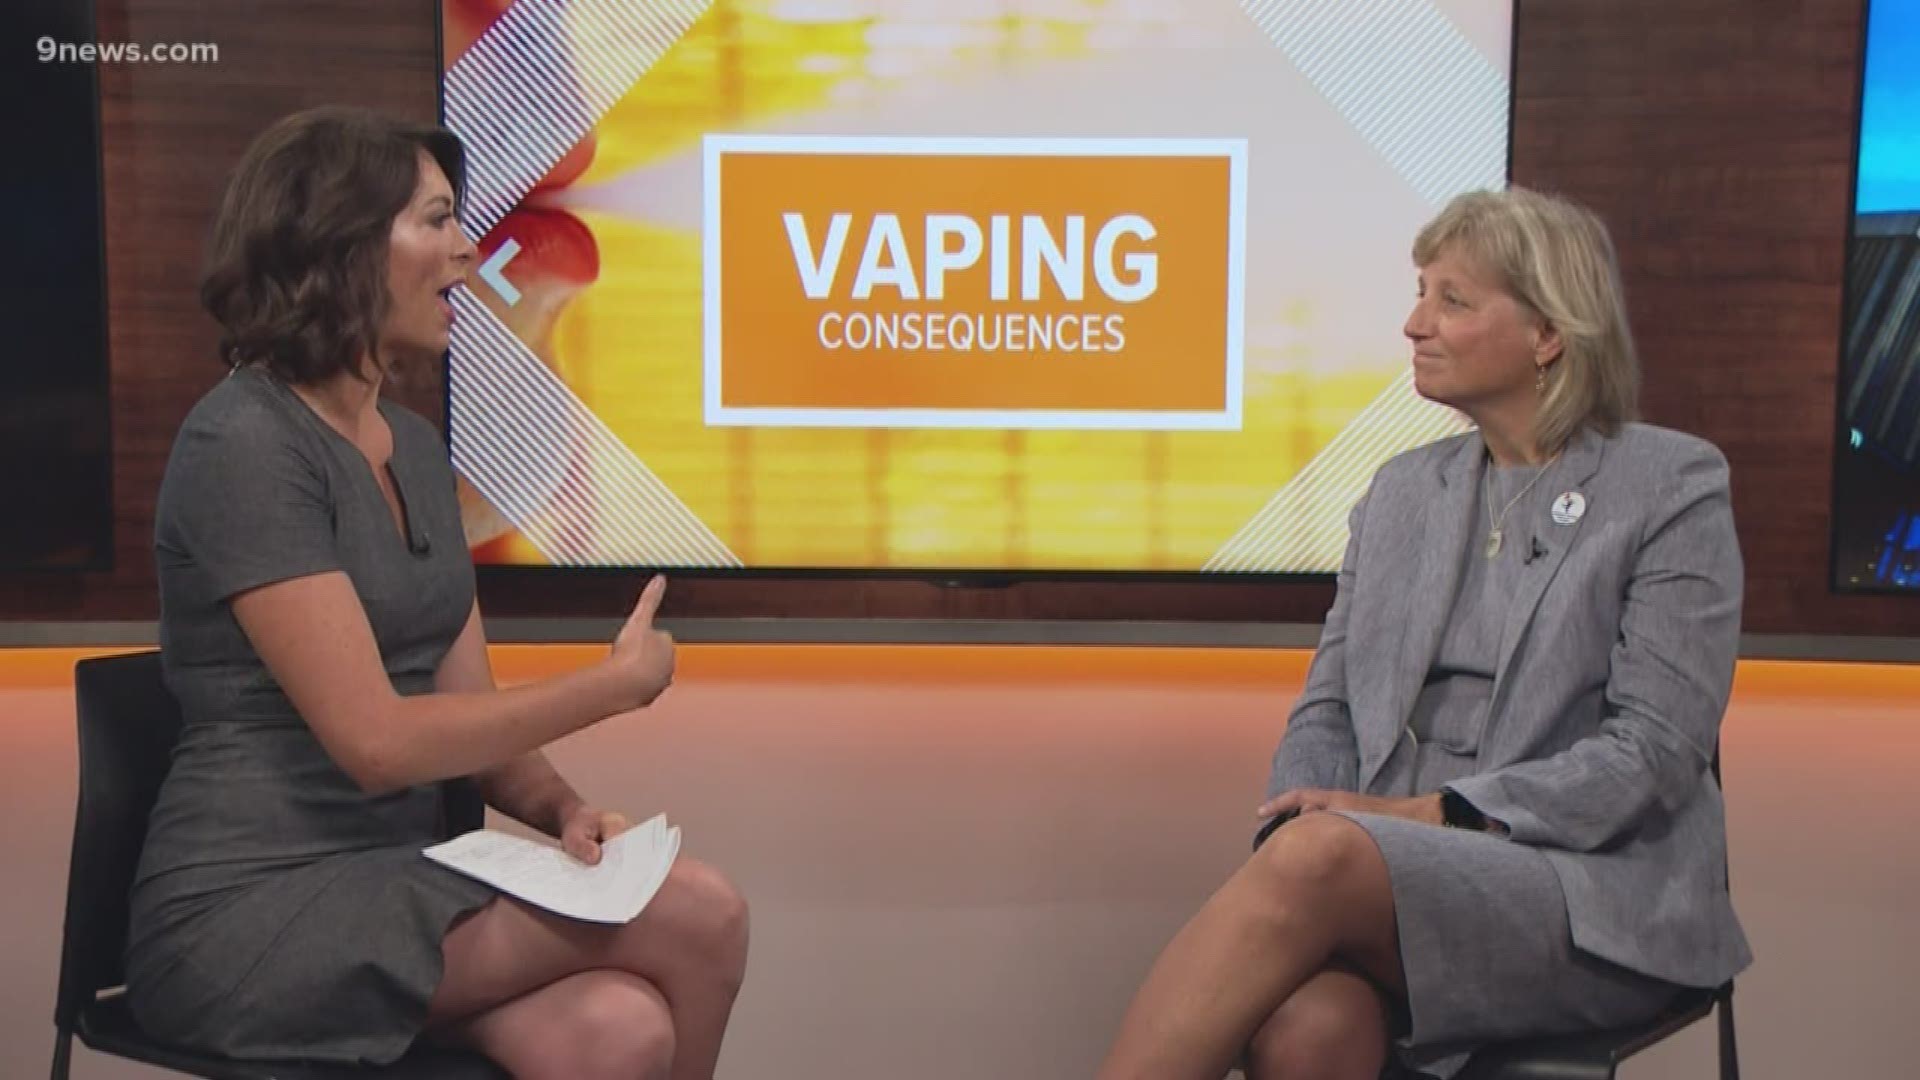 Dr. Robin Deterding from Children's Hospital Colorado specializes in pulmonary issues. She is discussing the dangers of vaping.